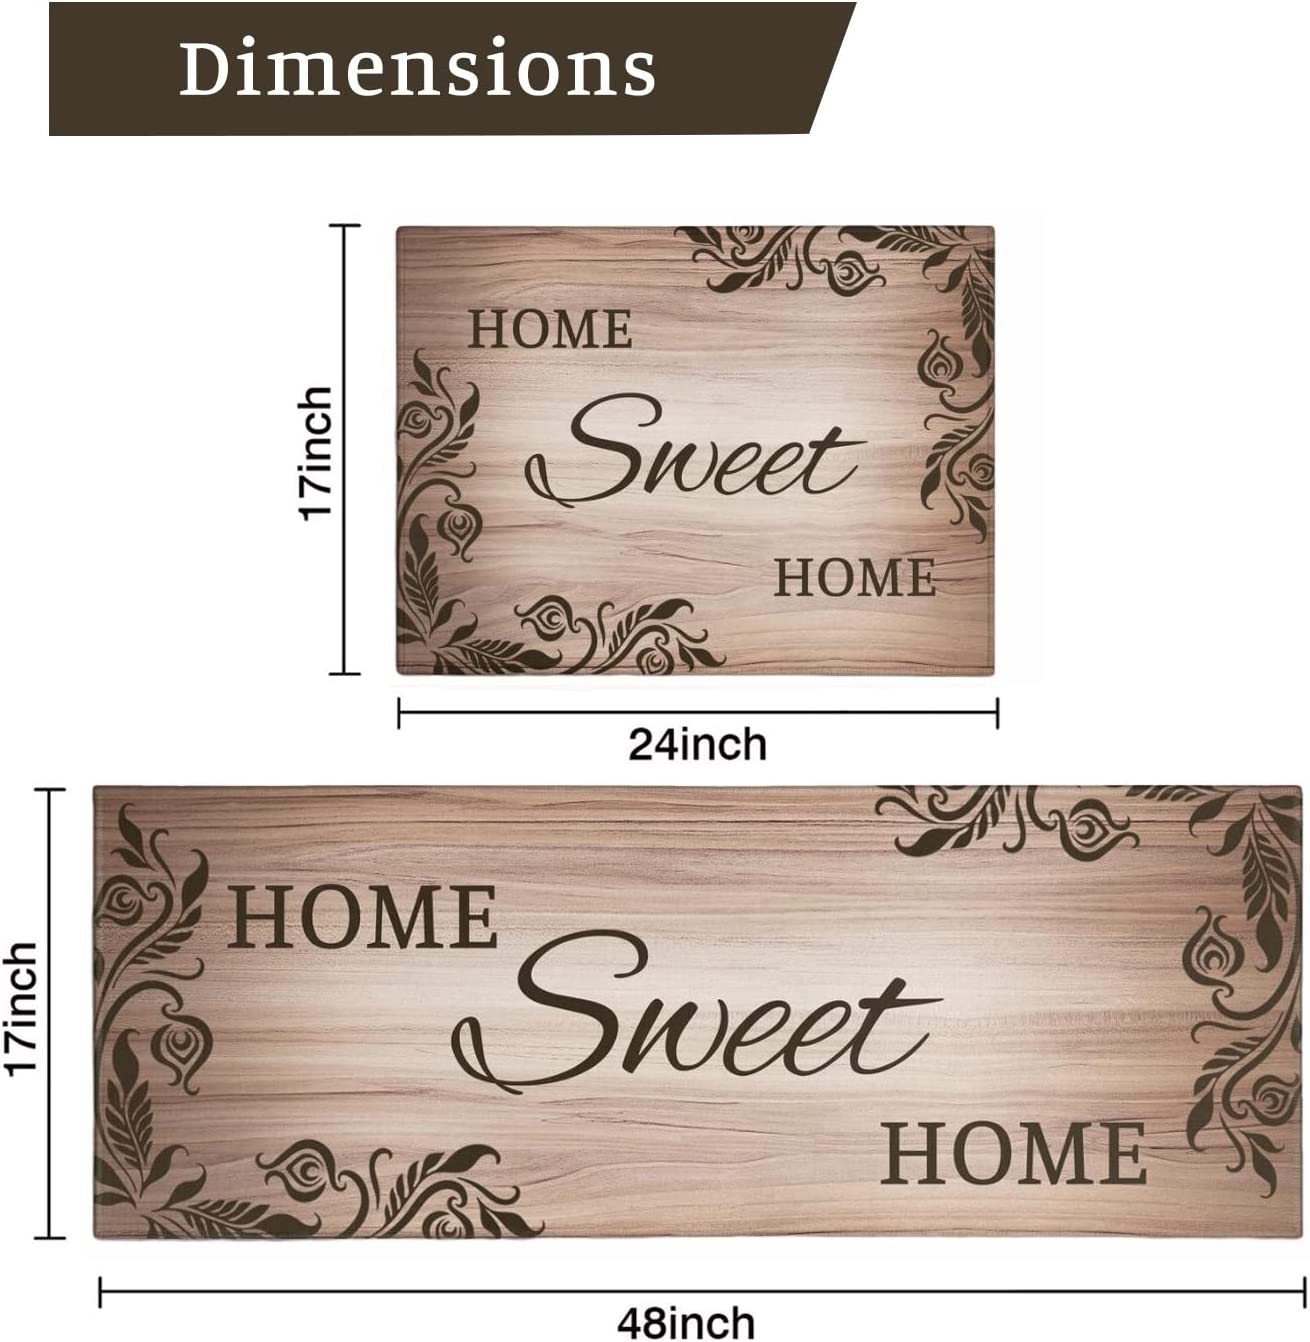 Kitchen Mats Floor Home Sweet Home - Kitchen Mat Set of 2, Brown Kitchen Rug, Farmhouse Kitchen Rugs for Kitchen Sink Area, Kitchen Sink Rugs and Mats, Kitchen Rugs with Words, 17x24 and 17x48 Inch - image 2 of 5